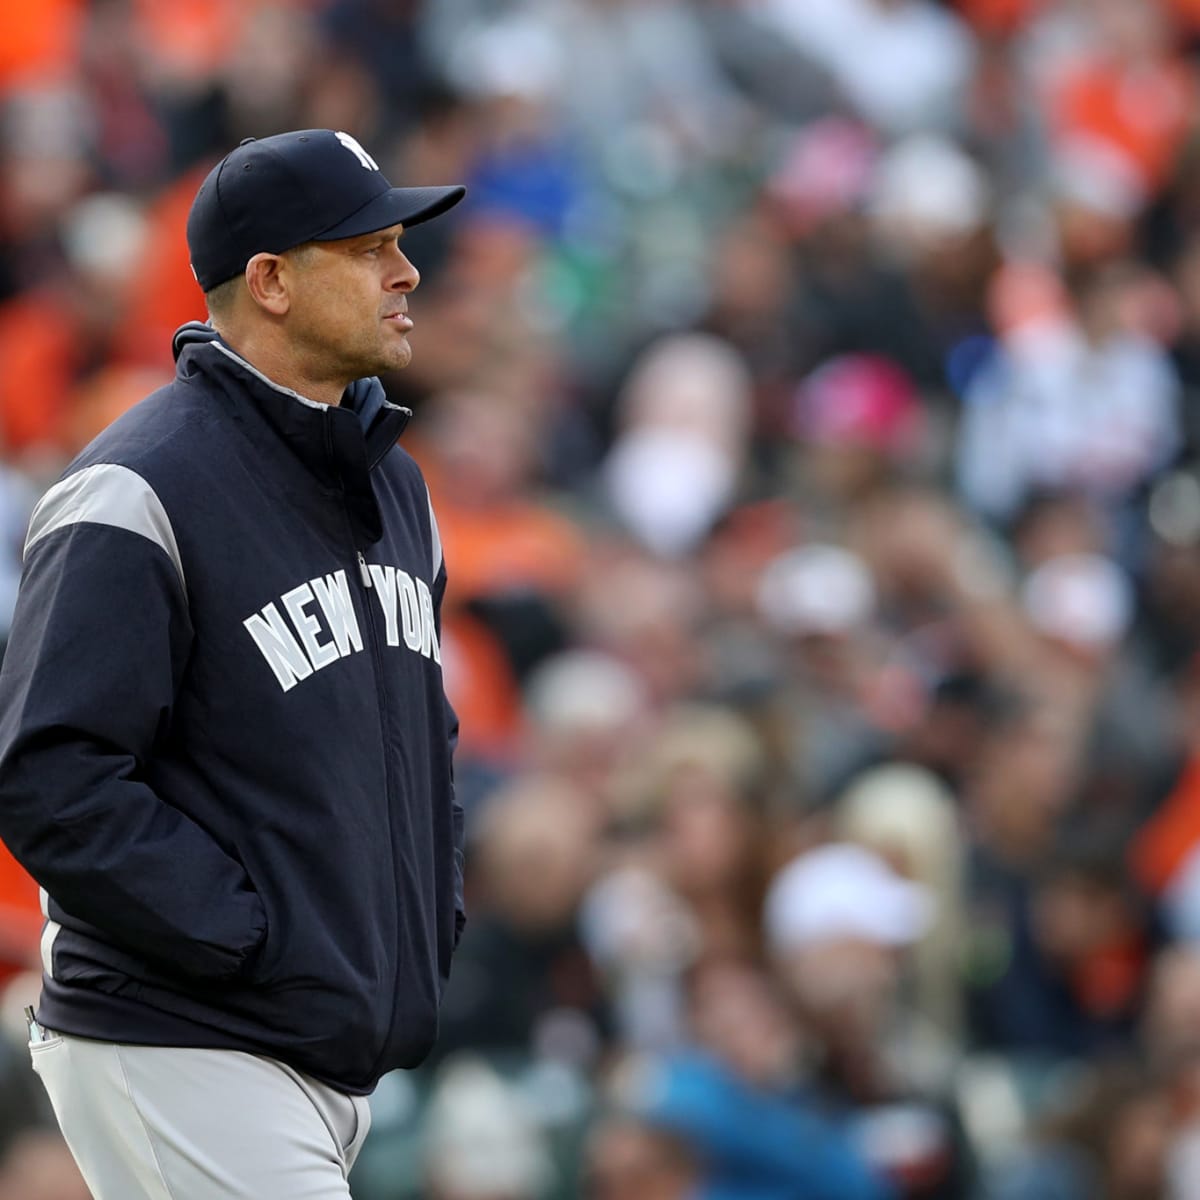 Yankees manager Aaron Boone gets pacemaker, takes leave